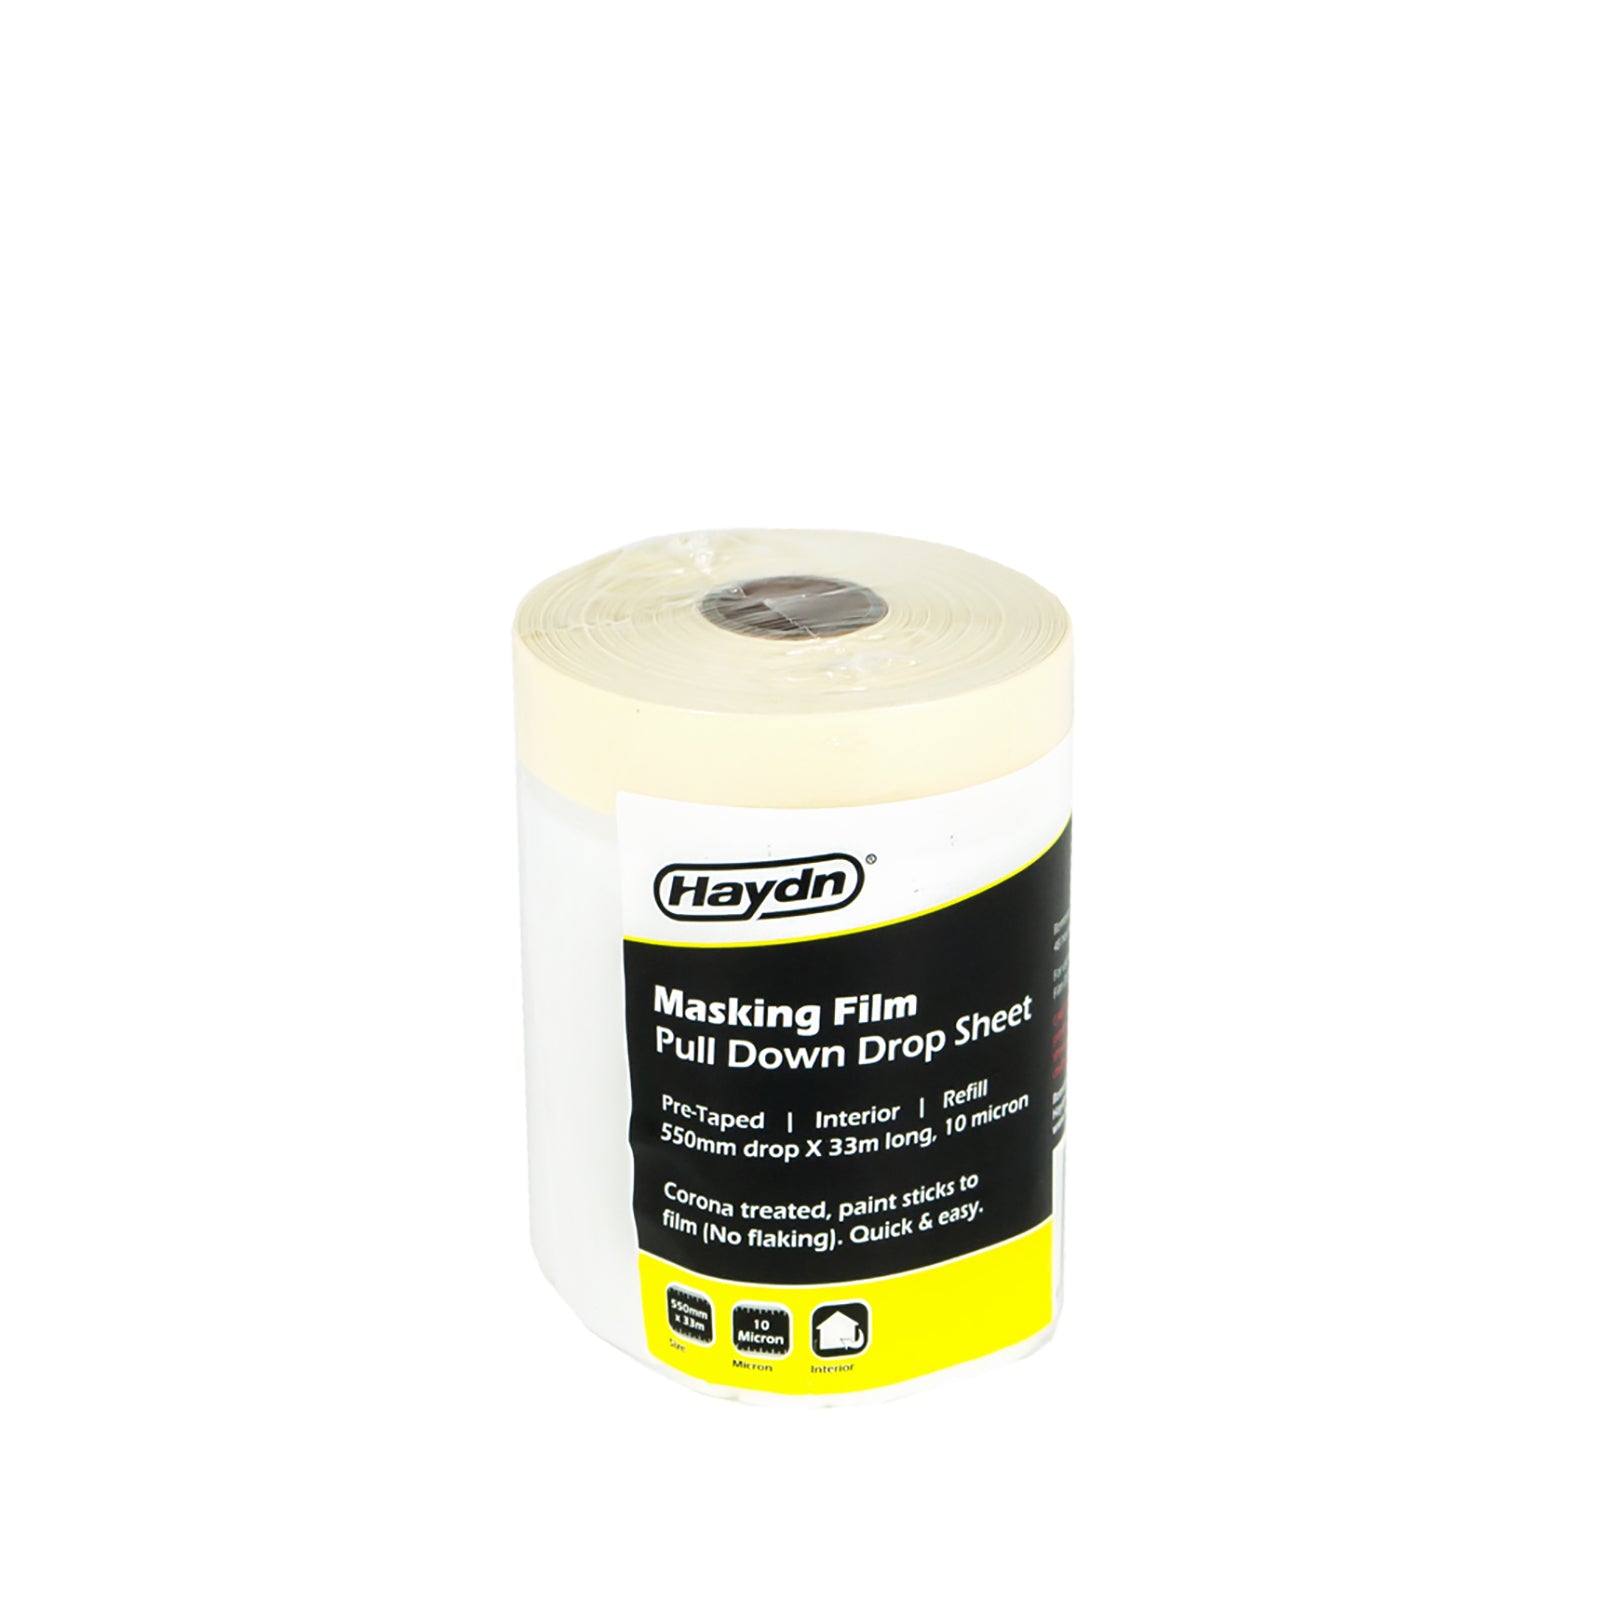 Pre taped fast masking paper for paint